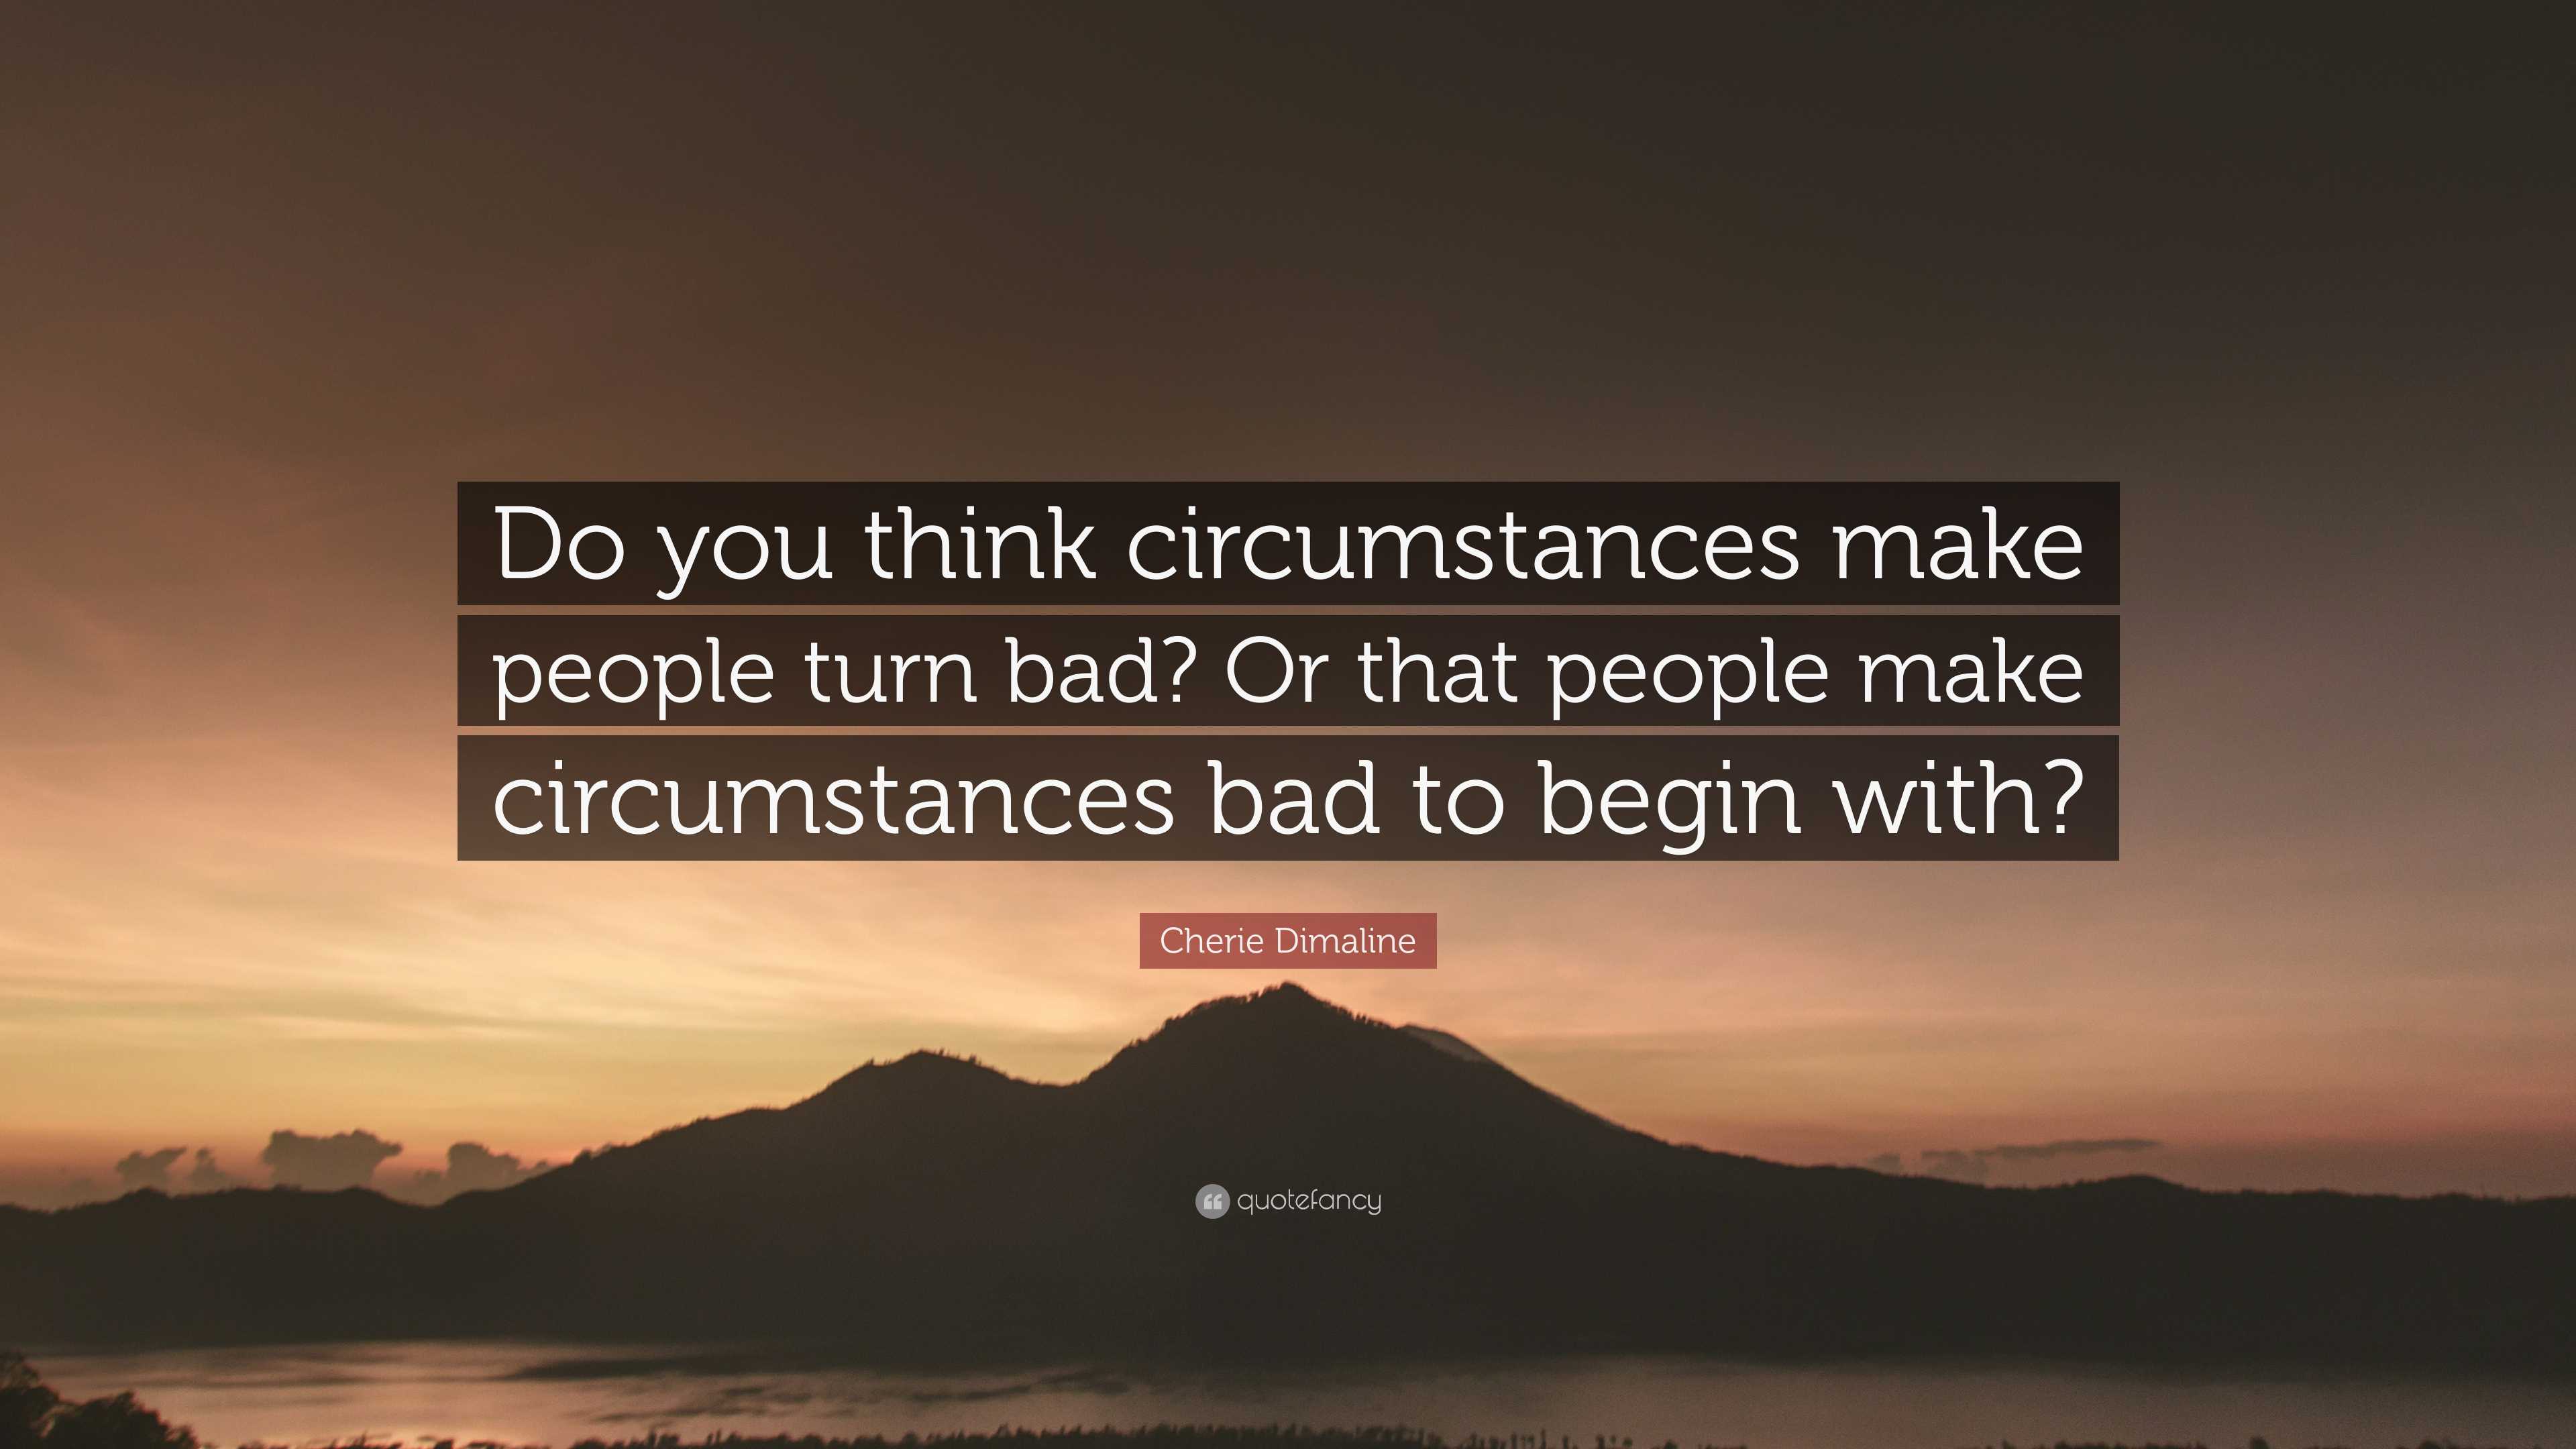 Cherie Dimaline Quote: “Do you think circumstances make people turn bad ...